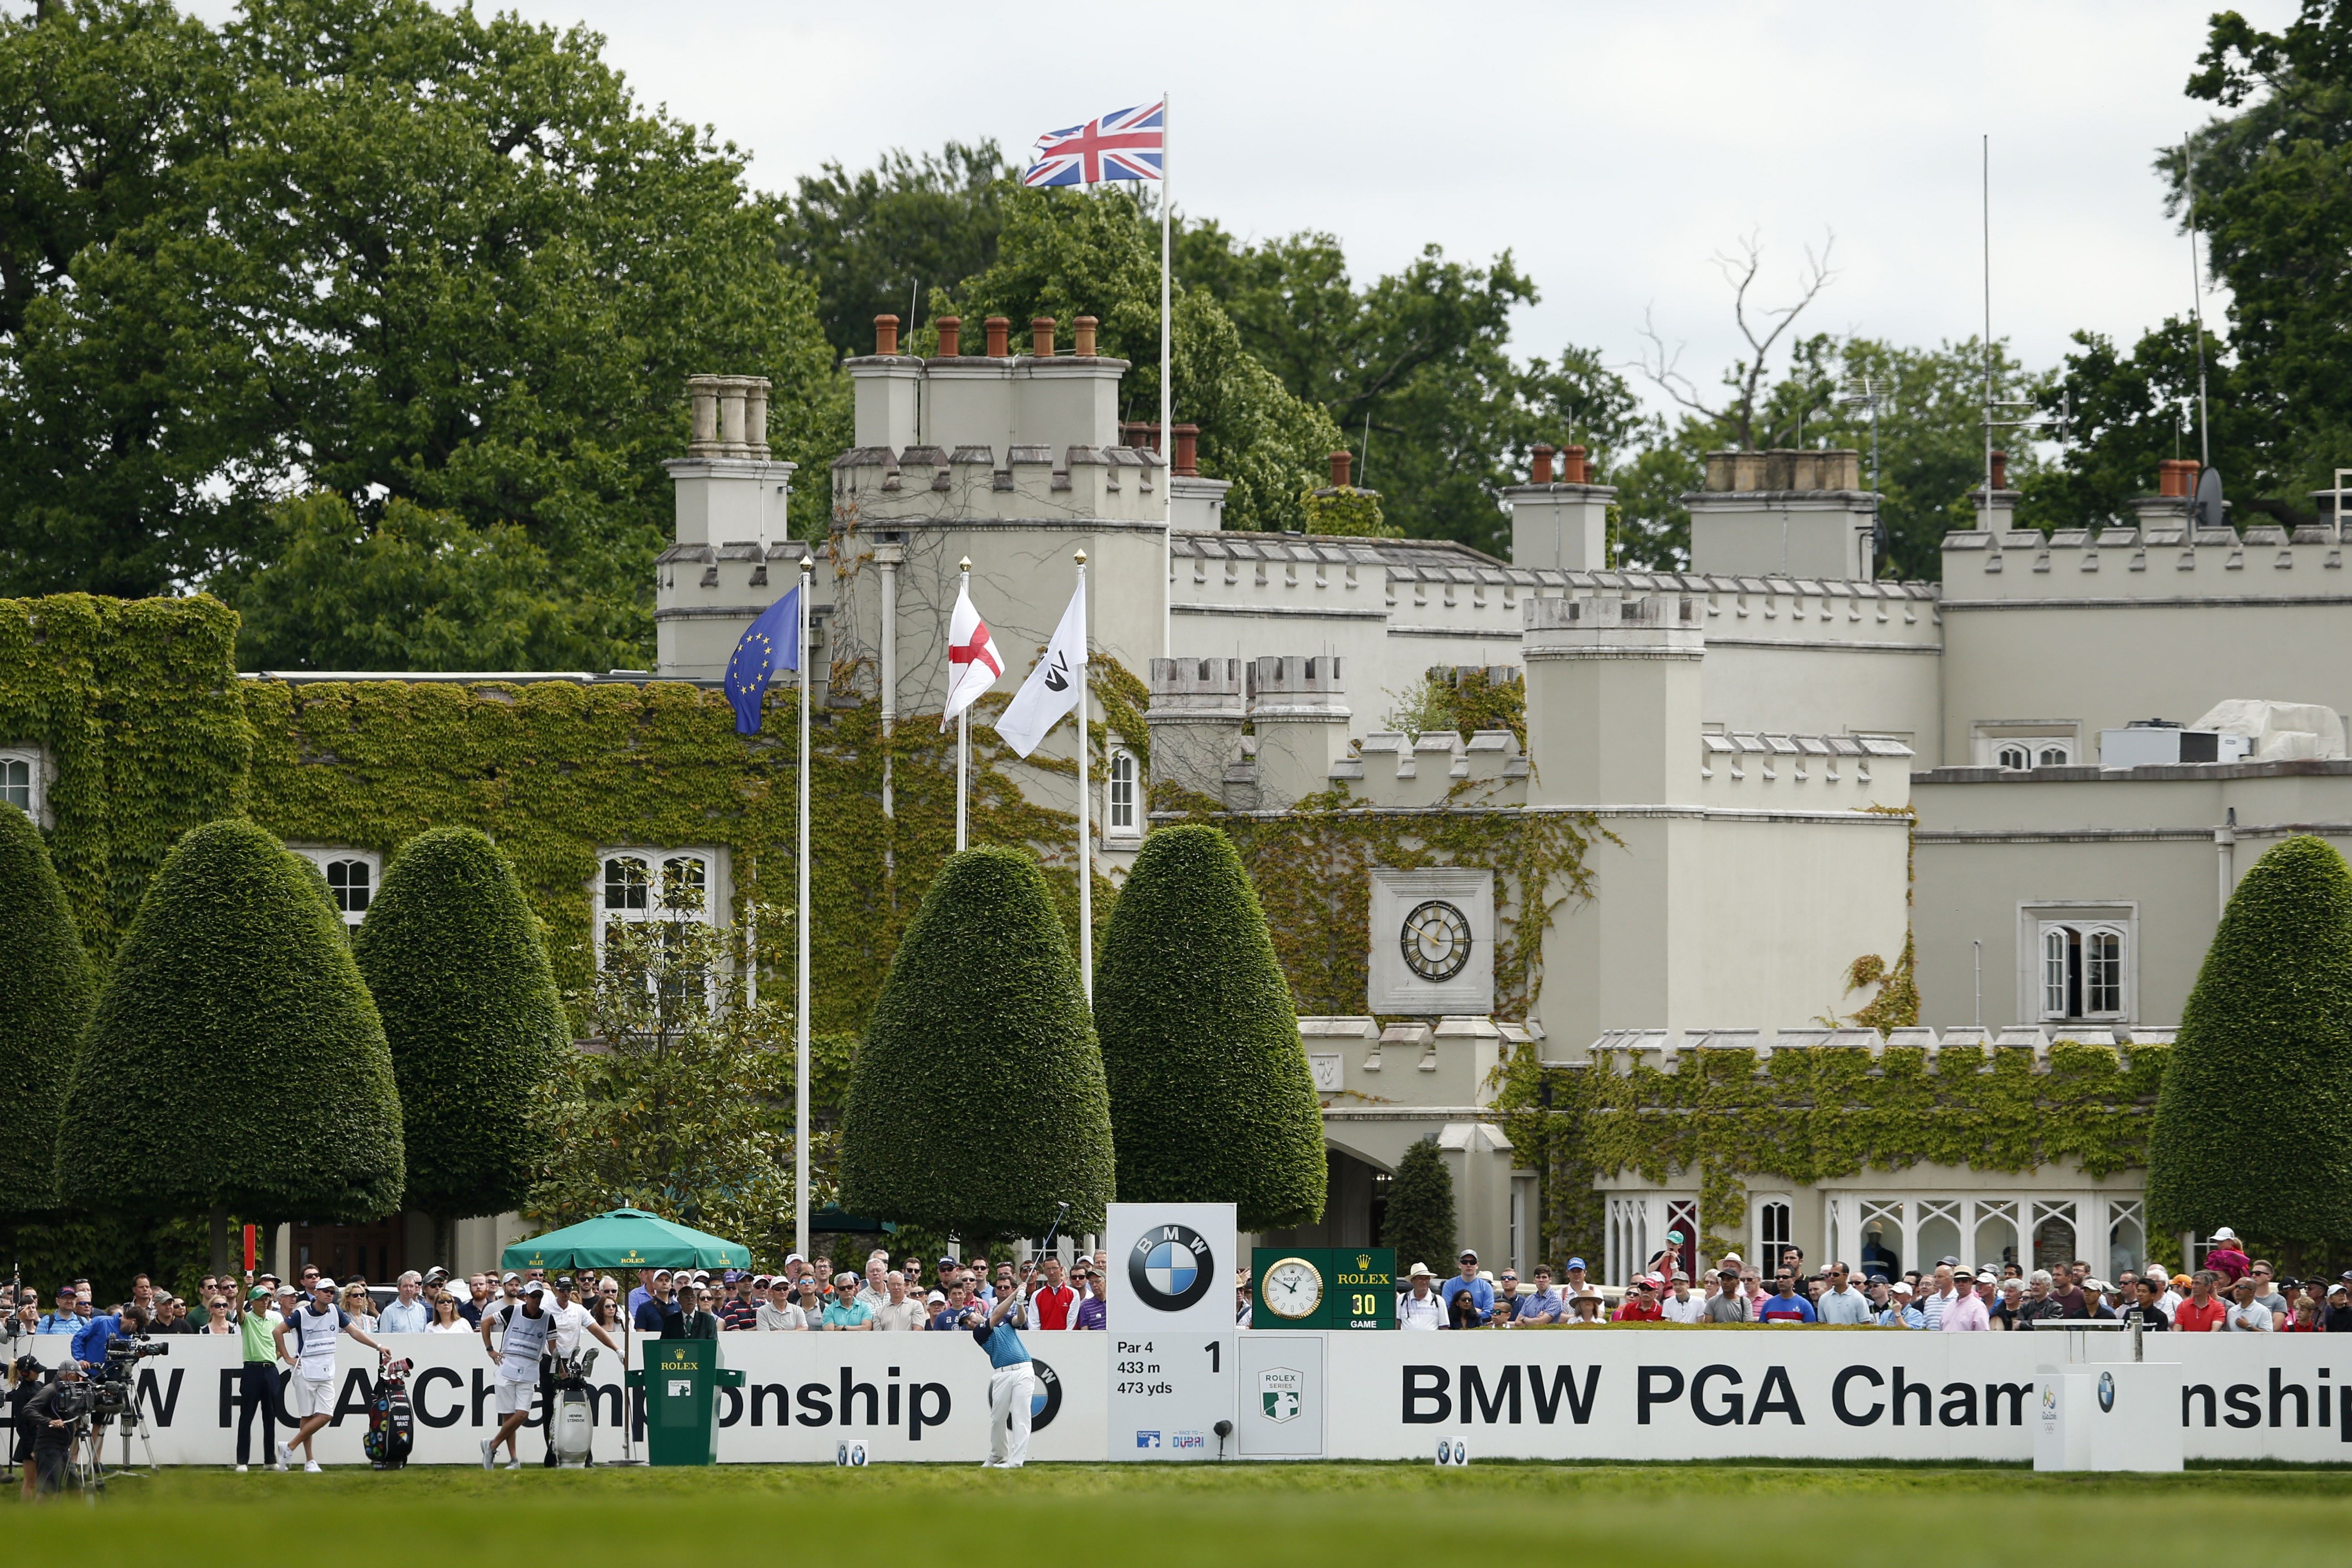 Patrons of Wentworth Club have been locked in a drawn-out battle with the club’s new owners in recent years. Photo: Reuters